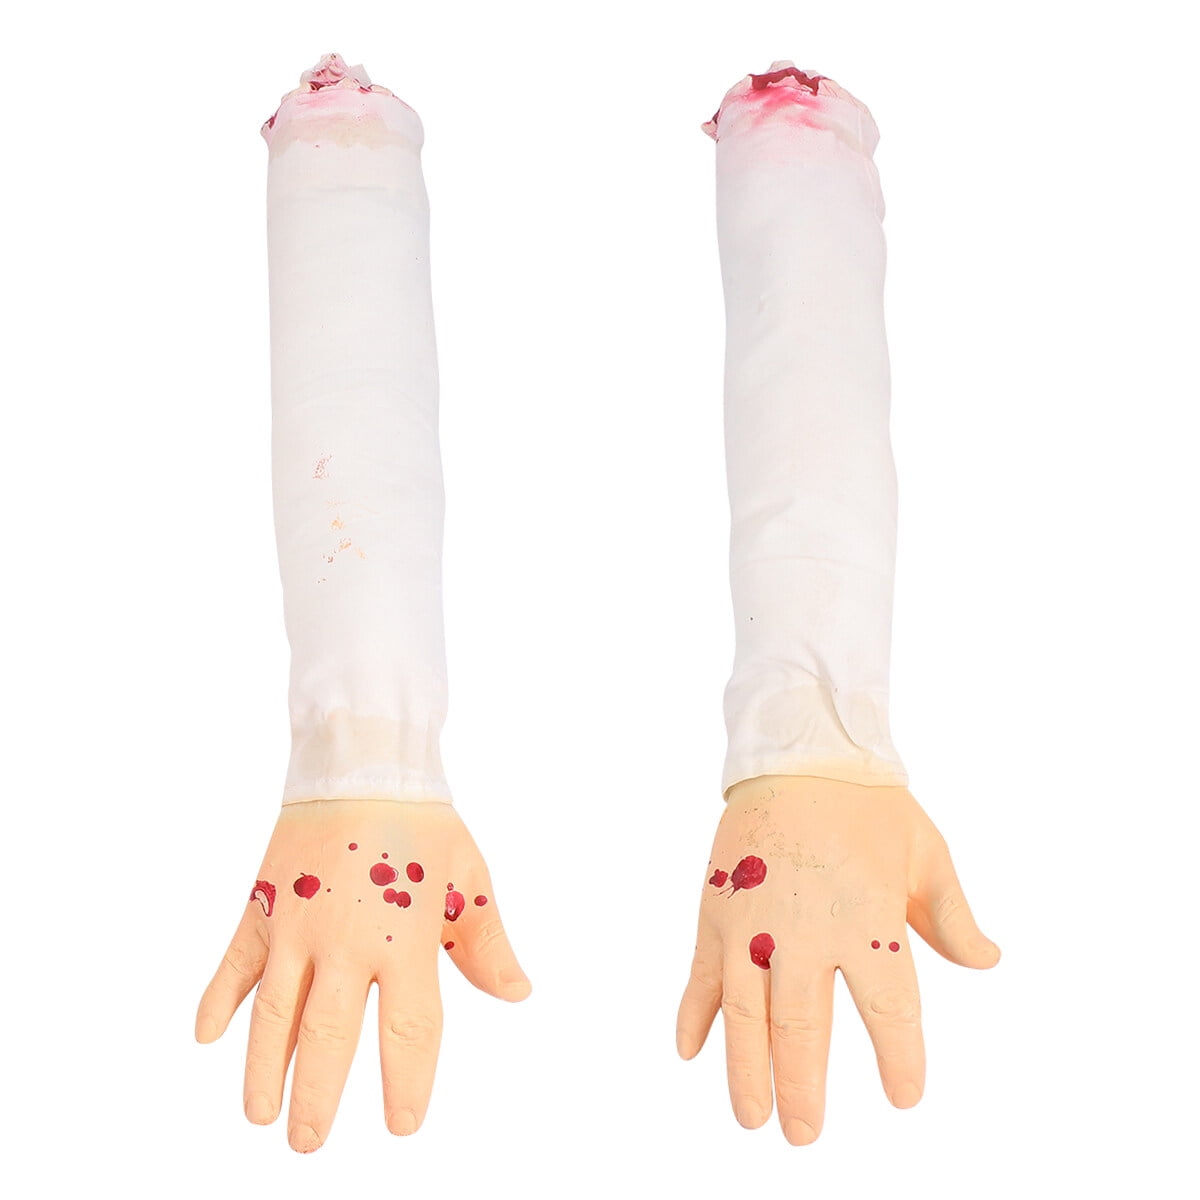 A SARKAR MAGIC WORLD GHOST HAND (RUBBER) / HALLOWEEN HAND / DUMMY FAKE  RUBBER GAG TOY HAND / HORROR BLOODY FAKE COSMETIC ARM GAG PRANK TOY Gag Toy  Price in India 